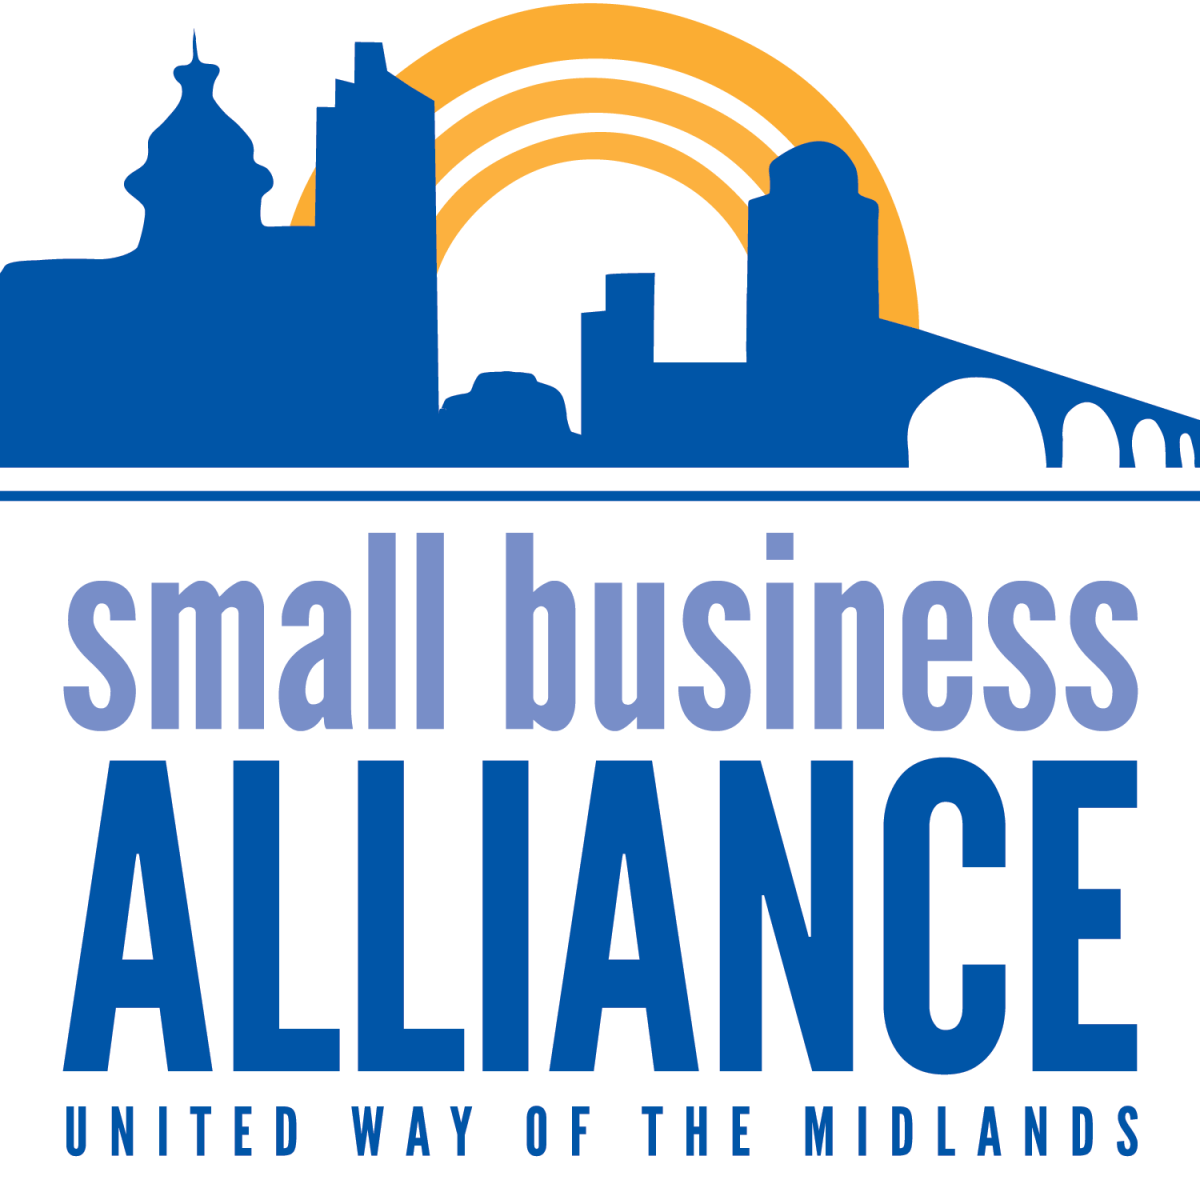 Small SBA Logo - Small Business Alliance. United Way of the Midlands